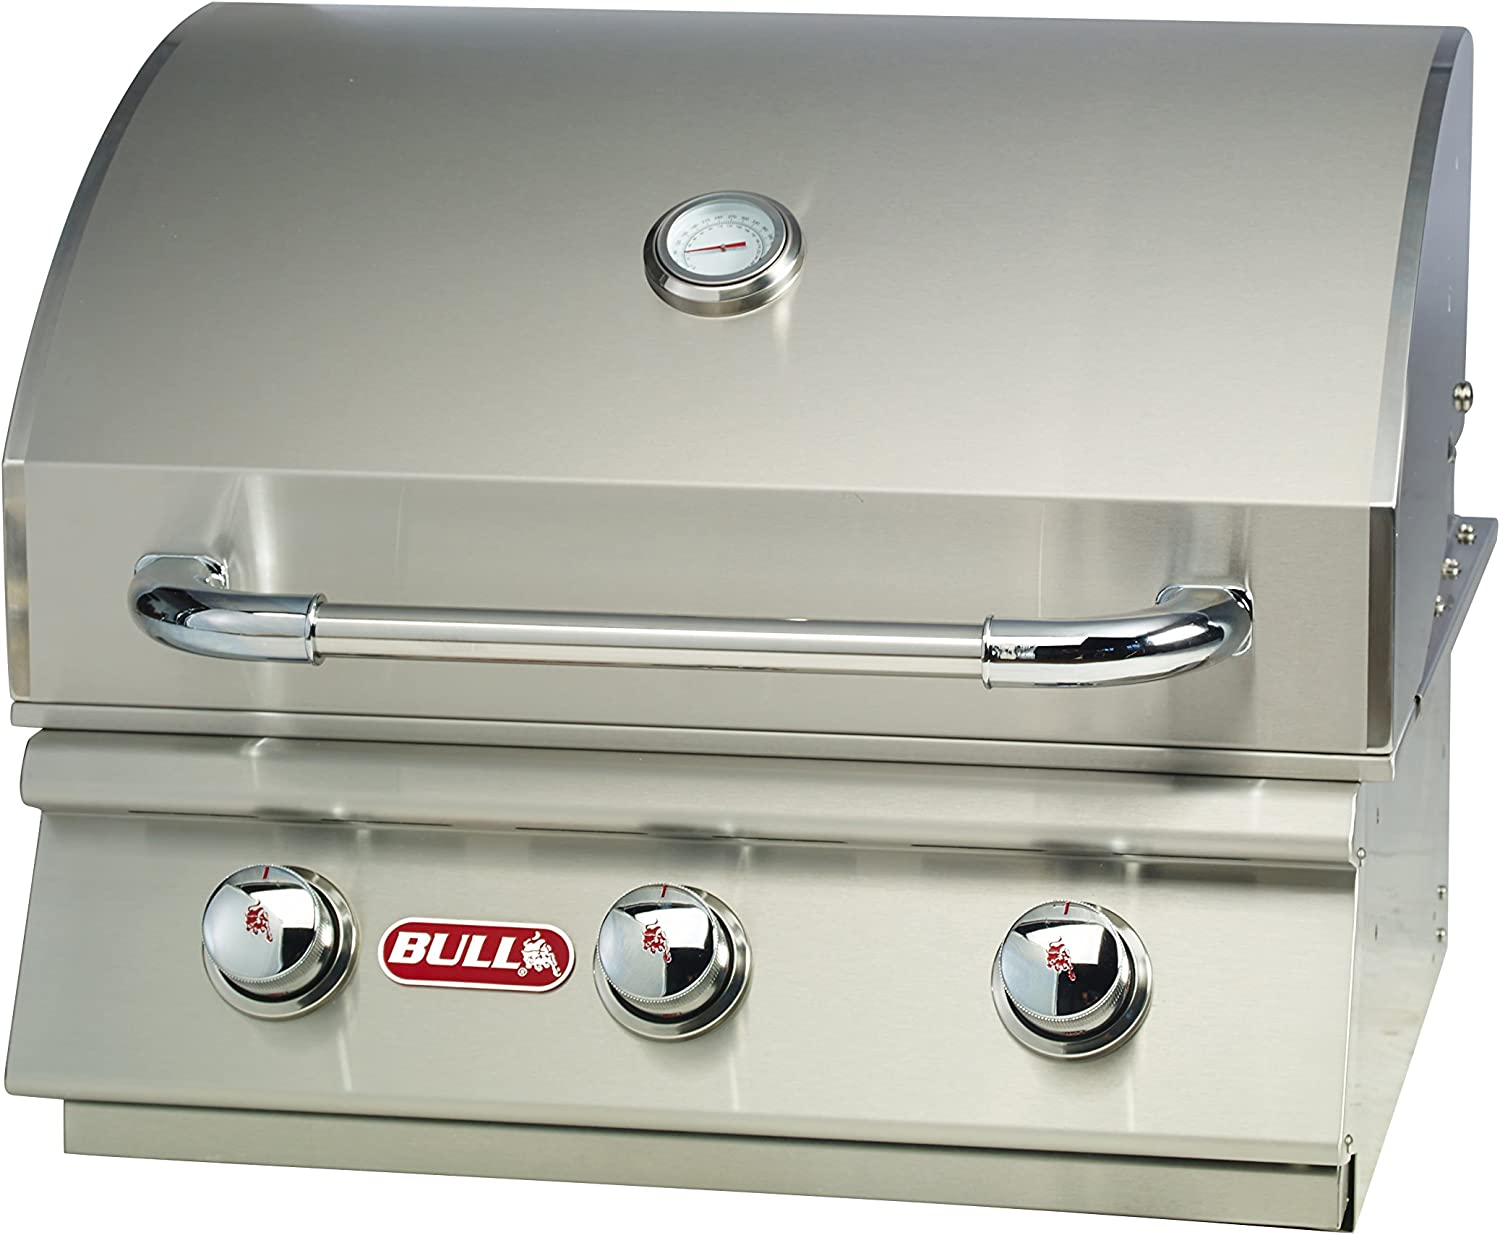 BULL 69009 Steer Head NG Natural-Gas-Grills, Stainless Steel